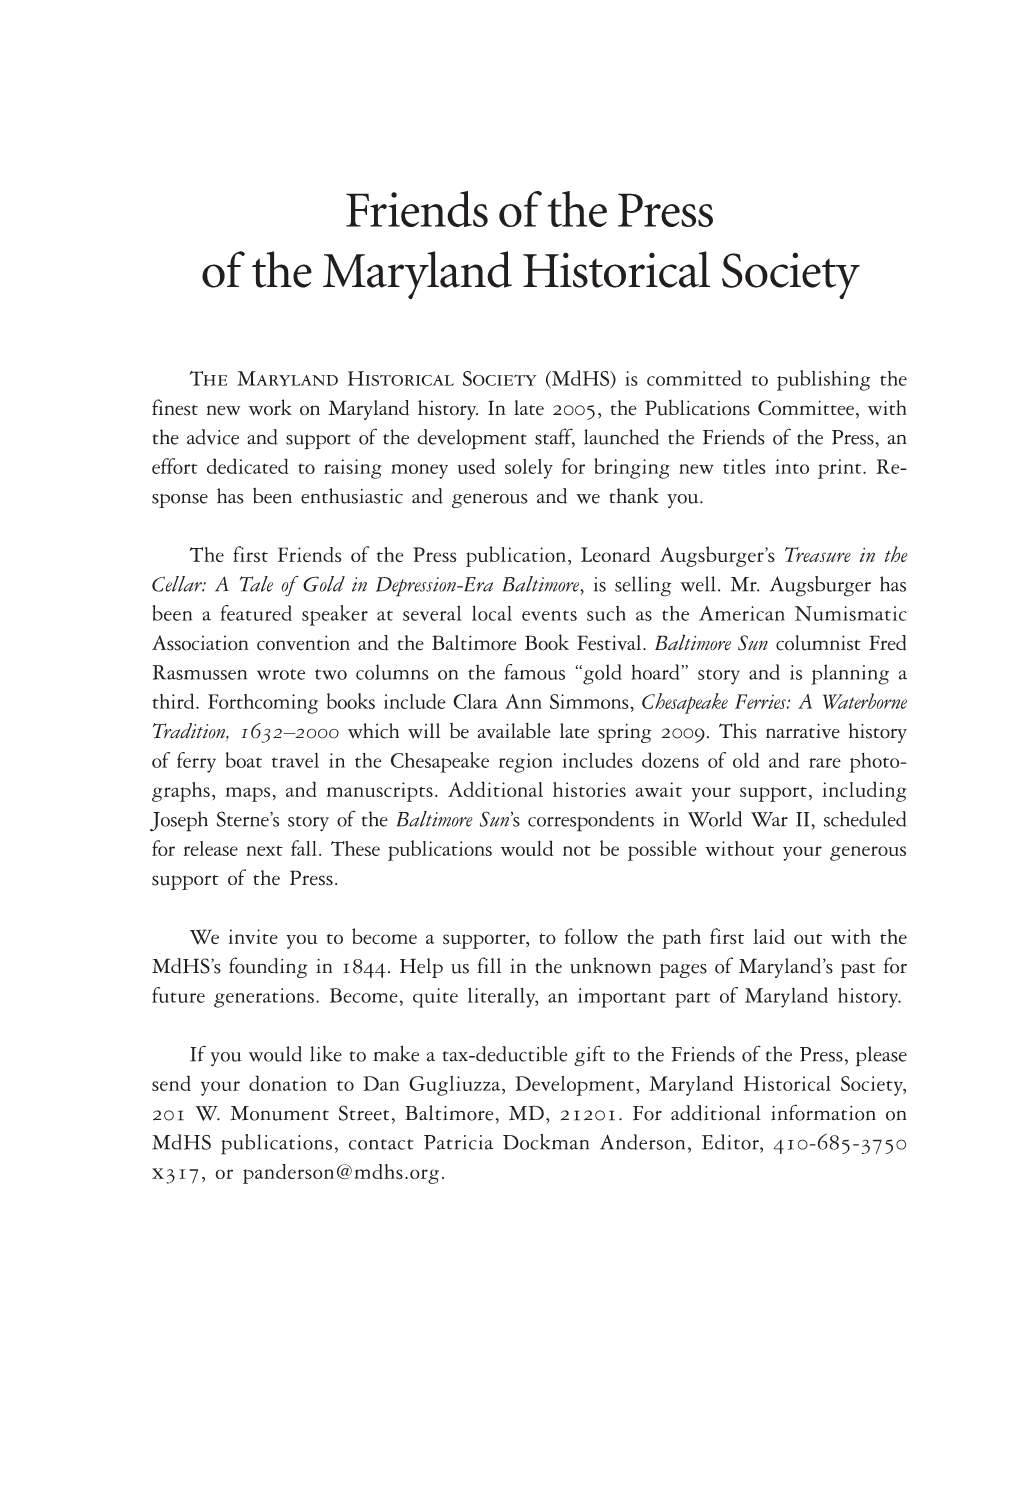 Friends of the Press of the Maryland Historical Society